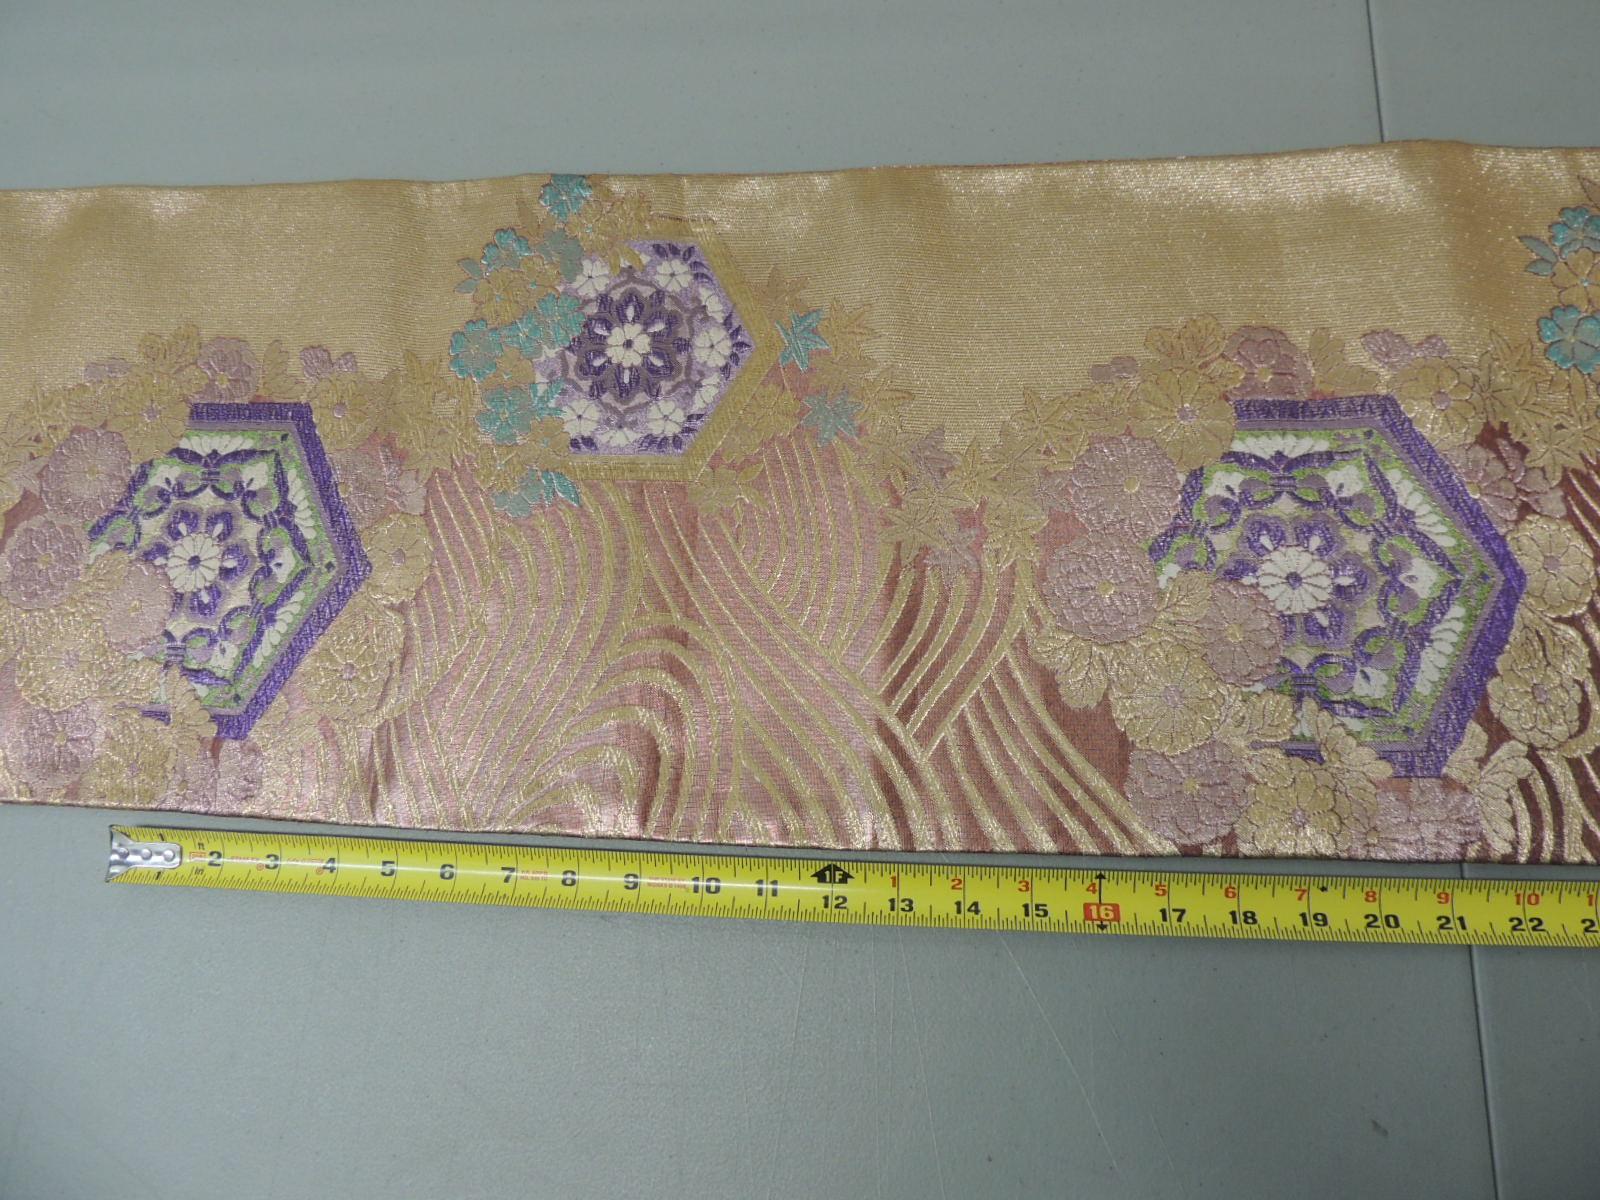 Mid-20th Century Long Golden Textured Woven Obi Textile Depicting Flowers in Bloom